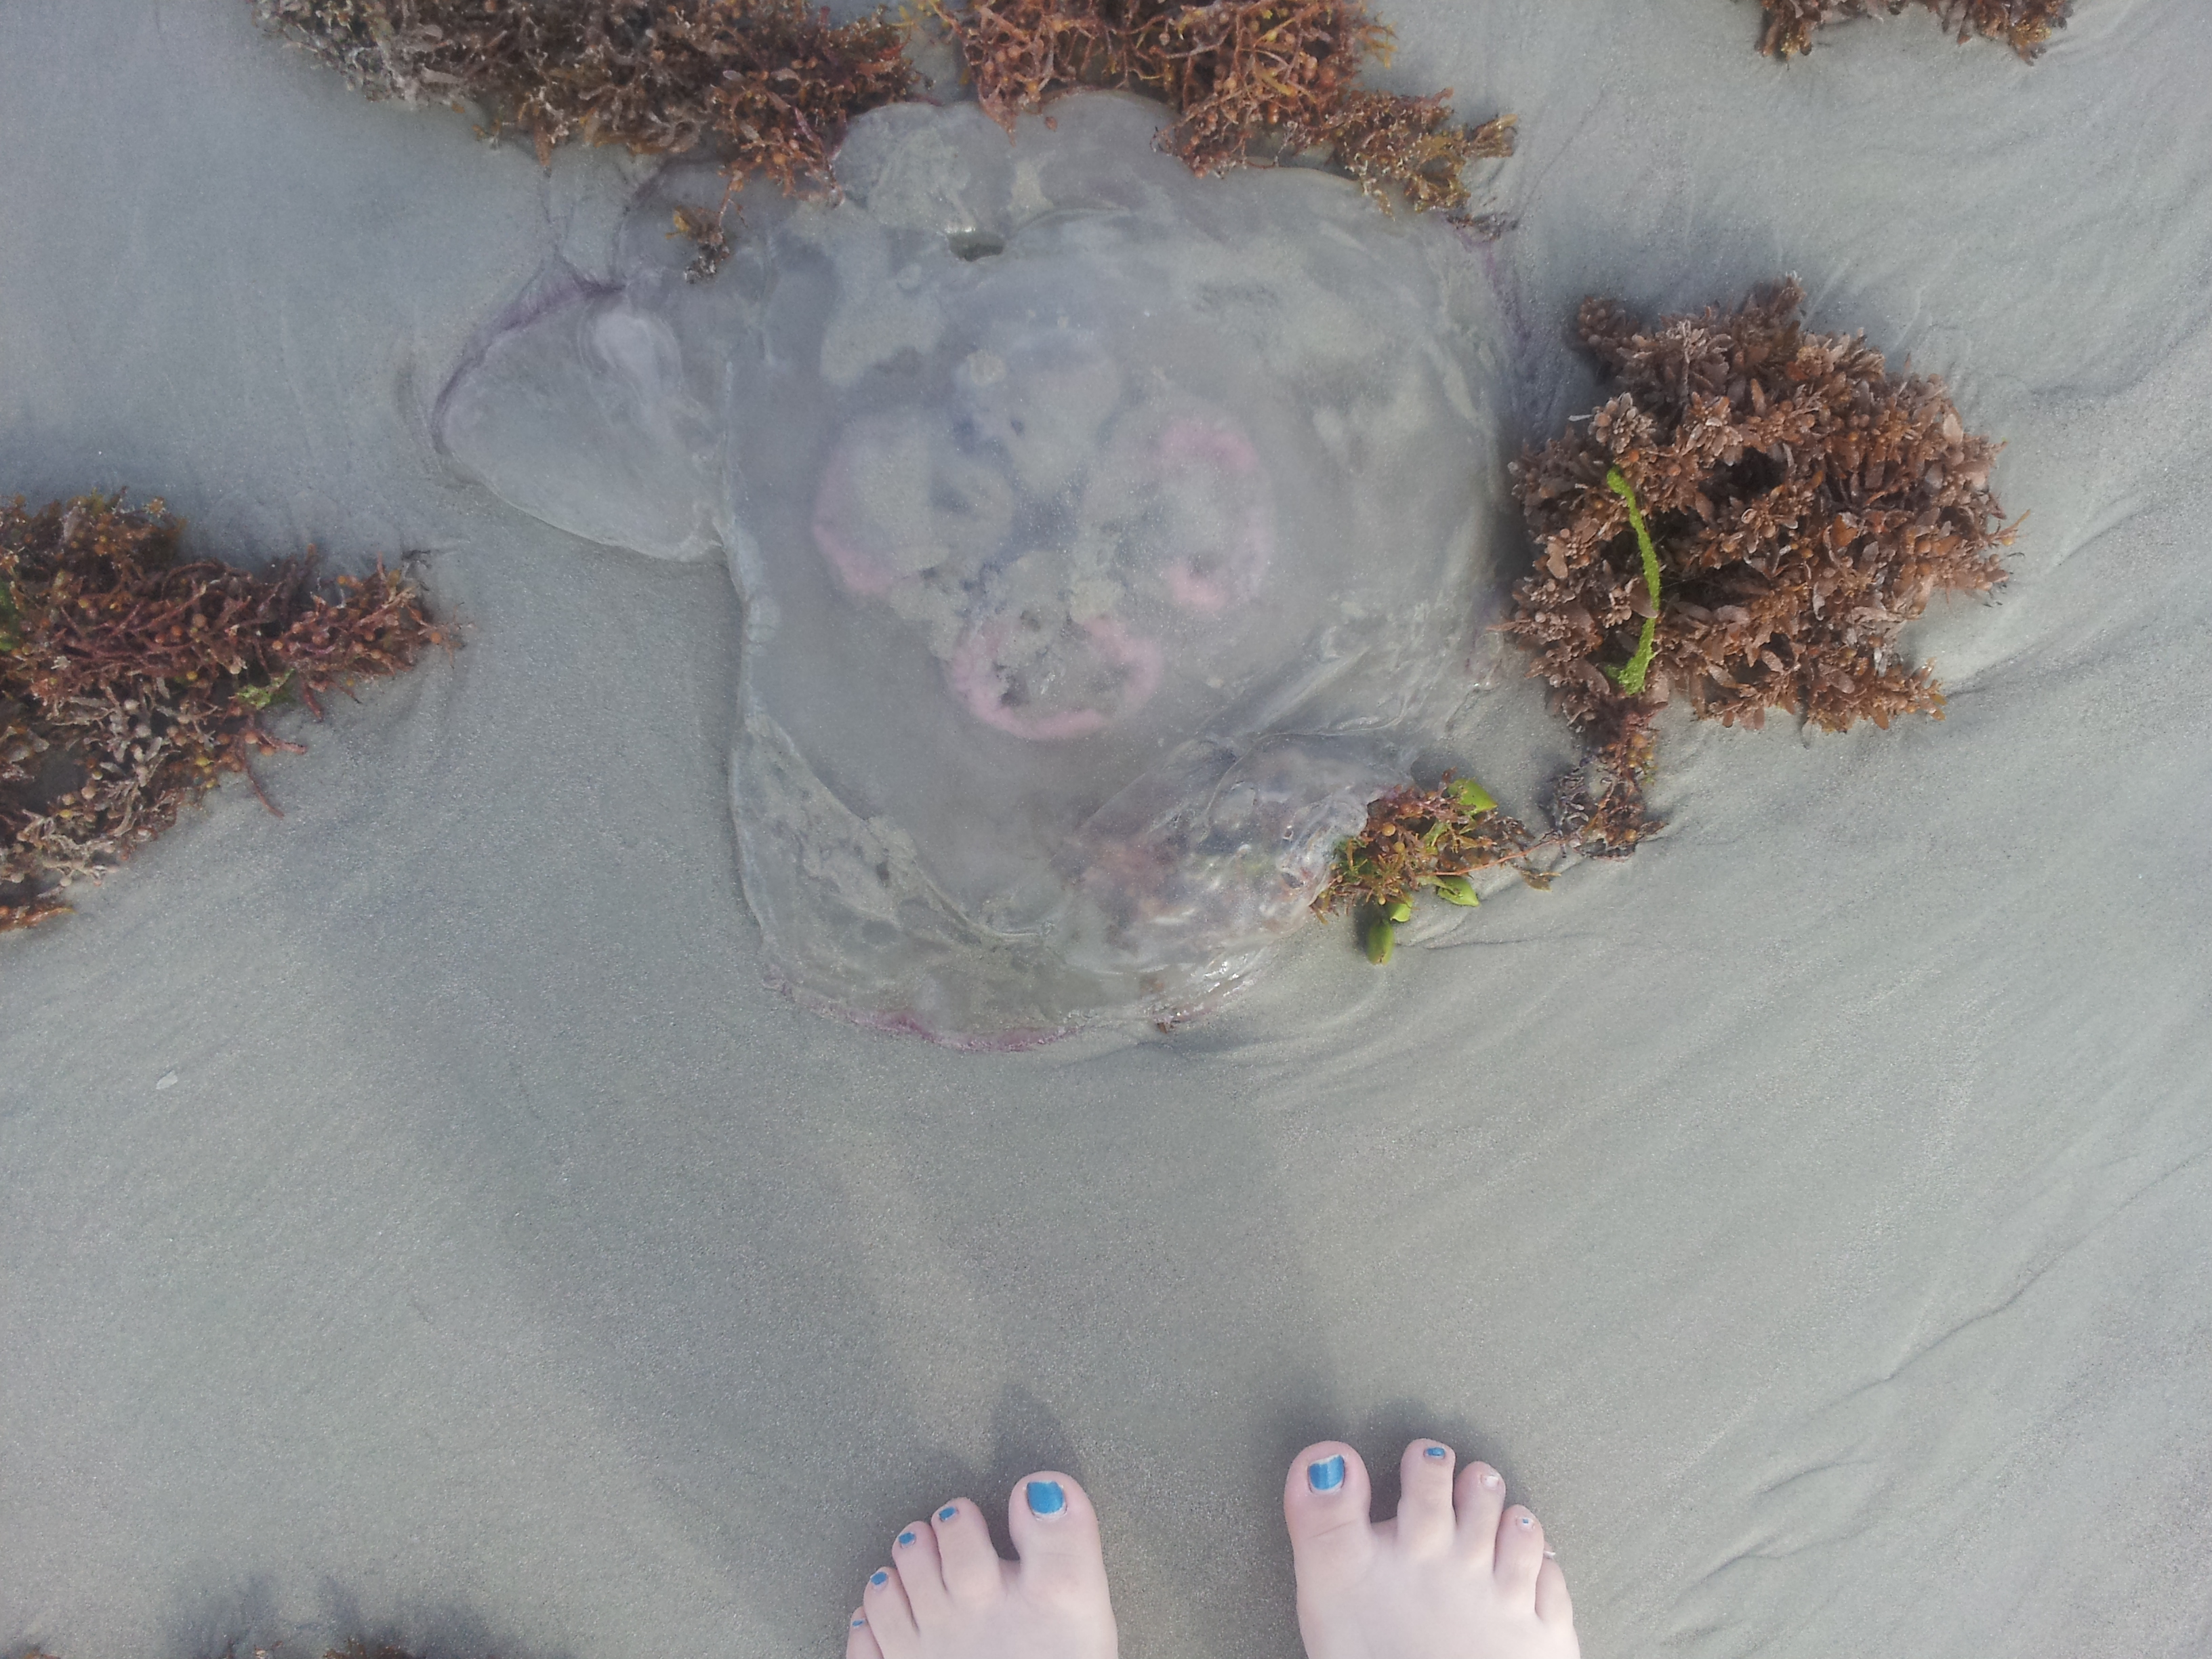 giant jelly fish... I really wanted to touch it